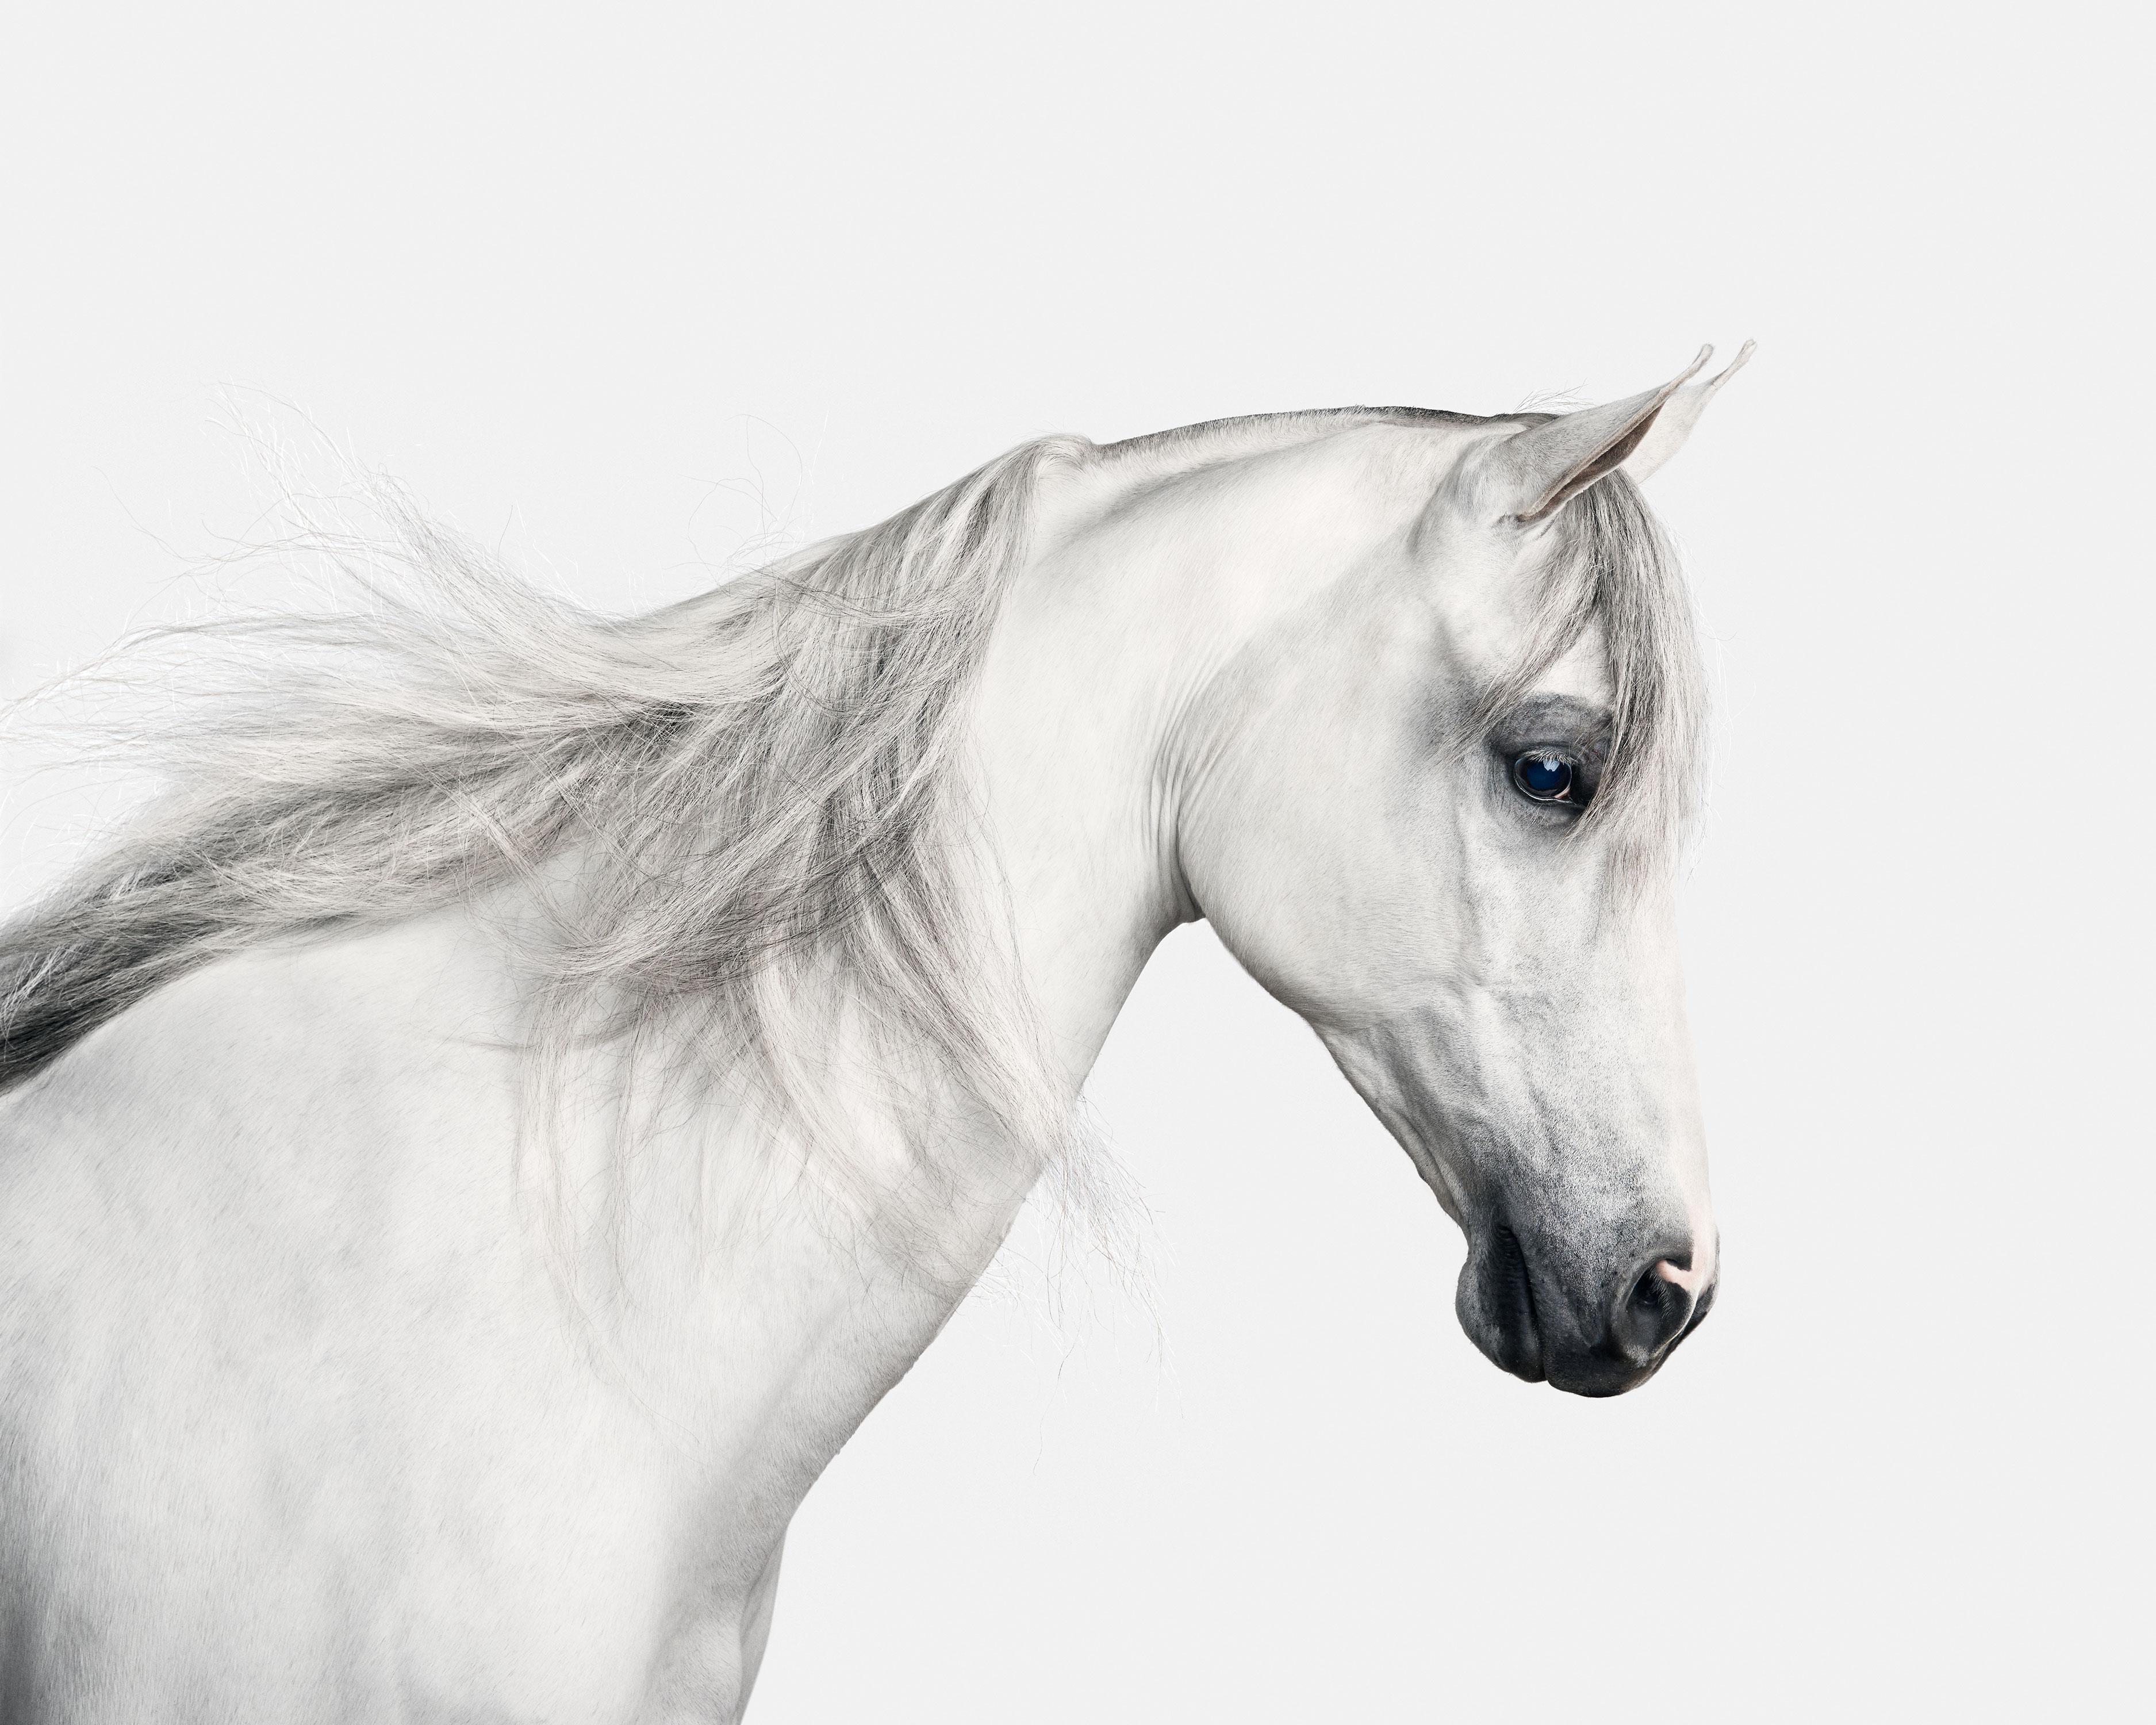 Available Sizes:
30" x 37.5" Edition of 15
40" x 50" Edition of 10
48" x 60" Edition of 5

The learning curve to photograph horses is significant.  There are many subtleties that should be acknowledged when creating the perfect portrait of a horse. 